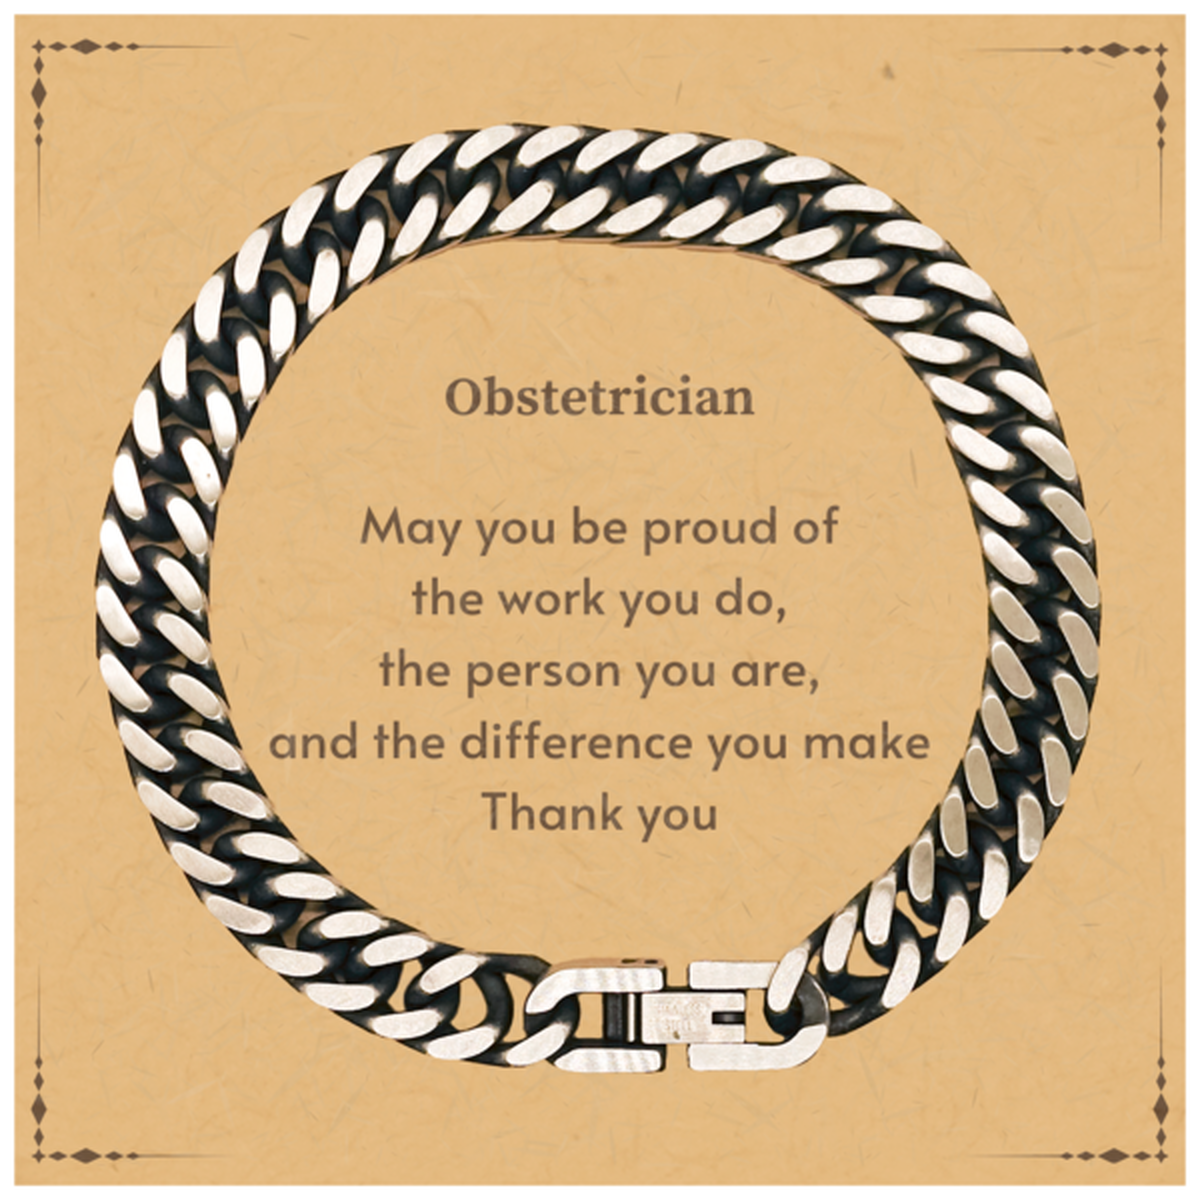 Heartwarming Cuban Link Chain Bracelet Retirement Coworkers Gifts for Obstetrician, Obstetrician May You be proud of the work you do, the person you are Gifts for Boss Men Women Friends